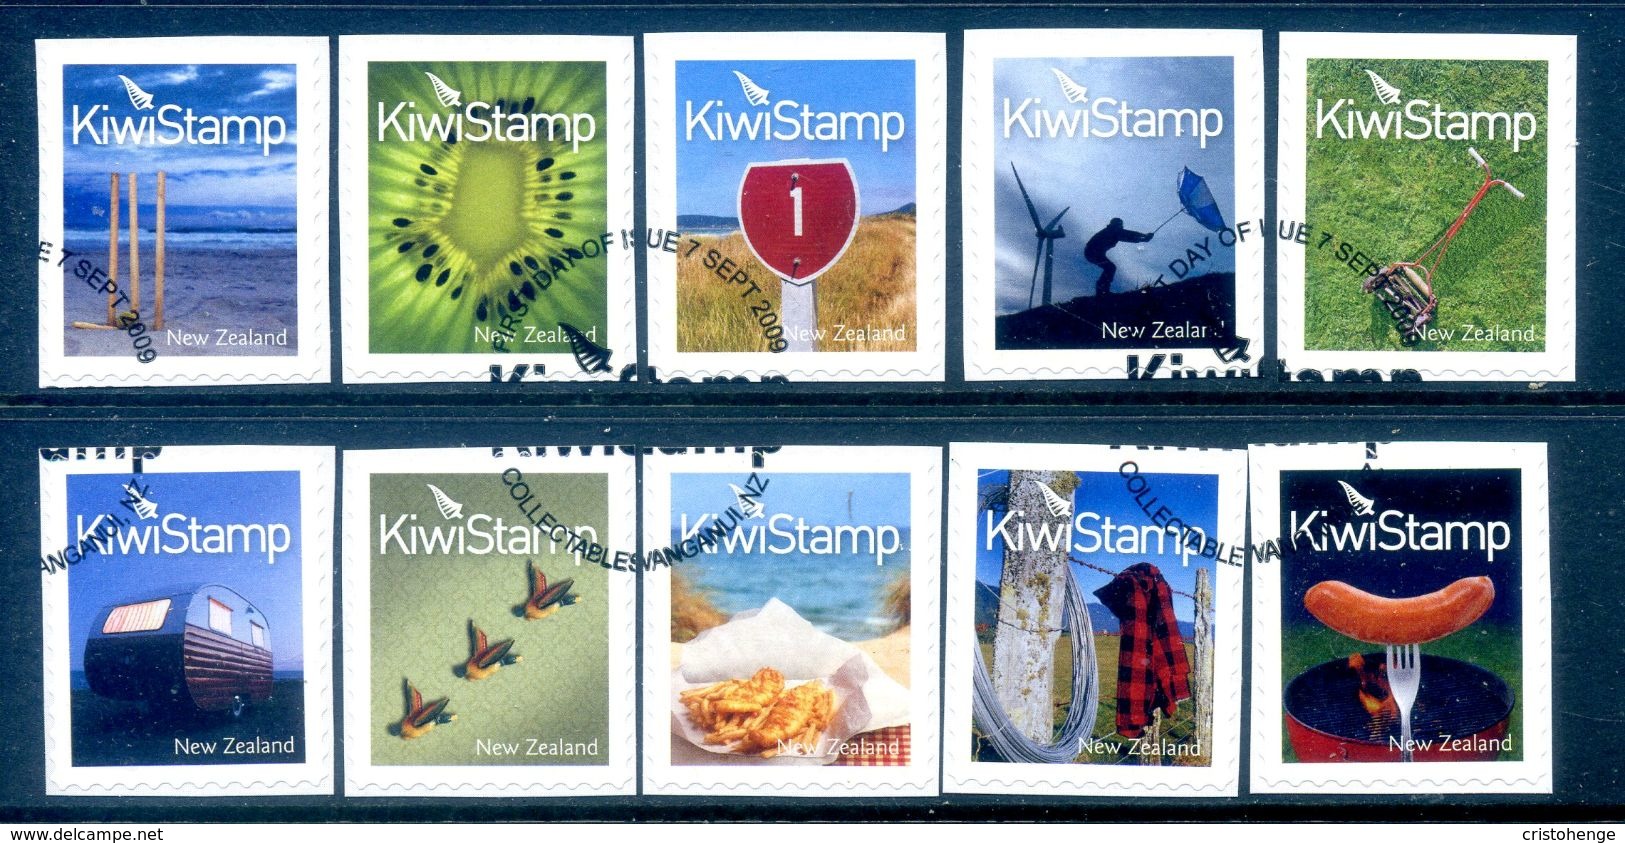 New Zealand 2009 Kiwistamps - 1st Issue Set Used (SG 3162-71) - Used Stamps